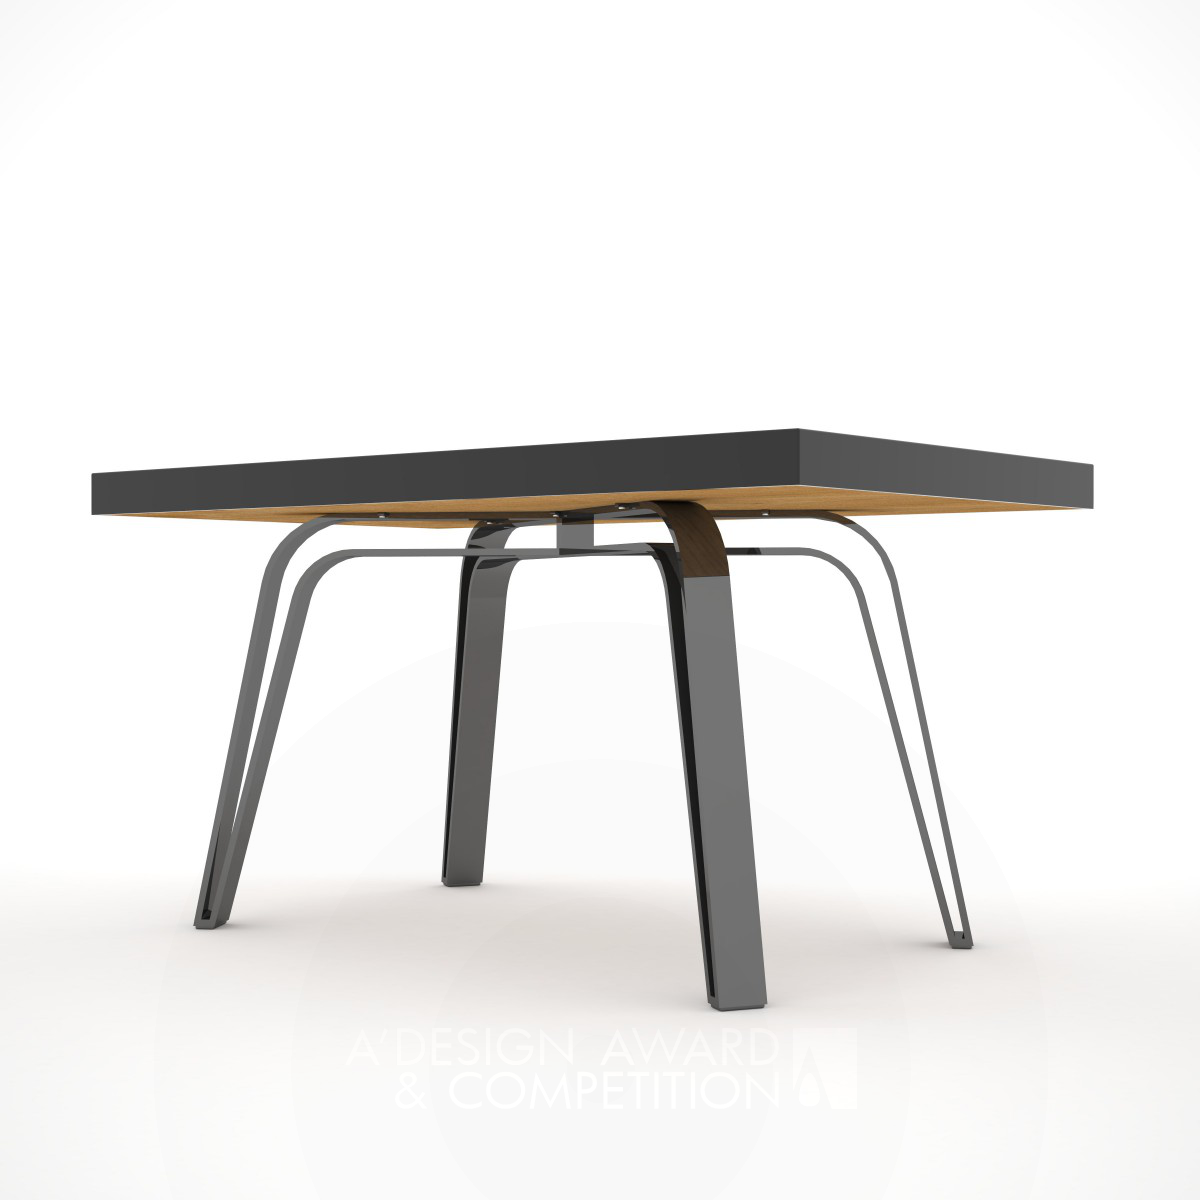 Conticross Work table by Anushka Contractor